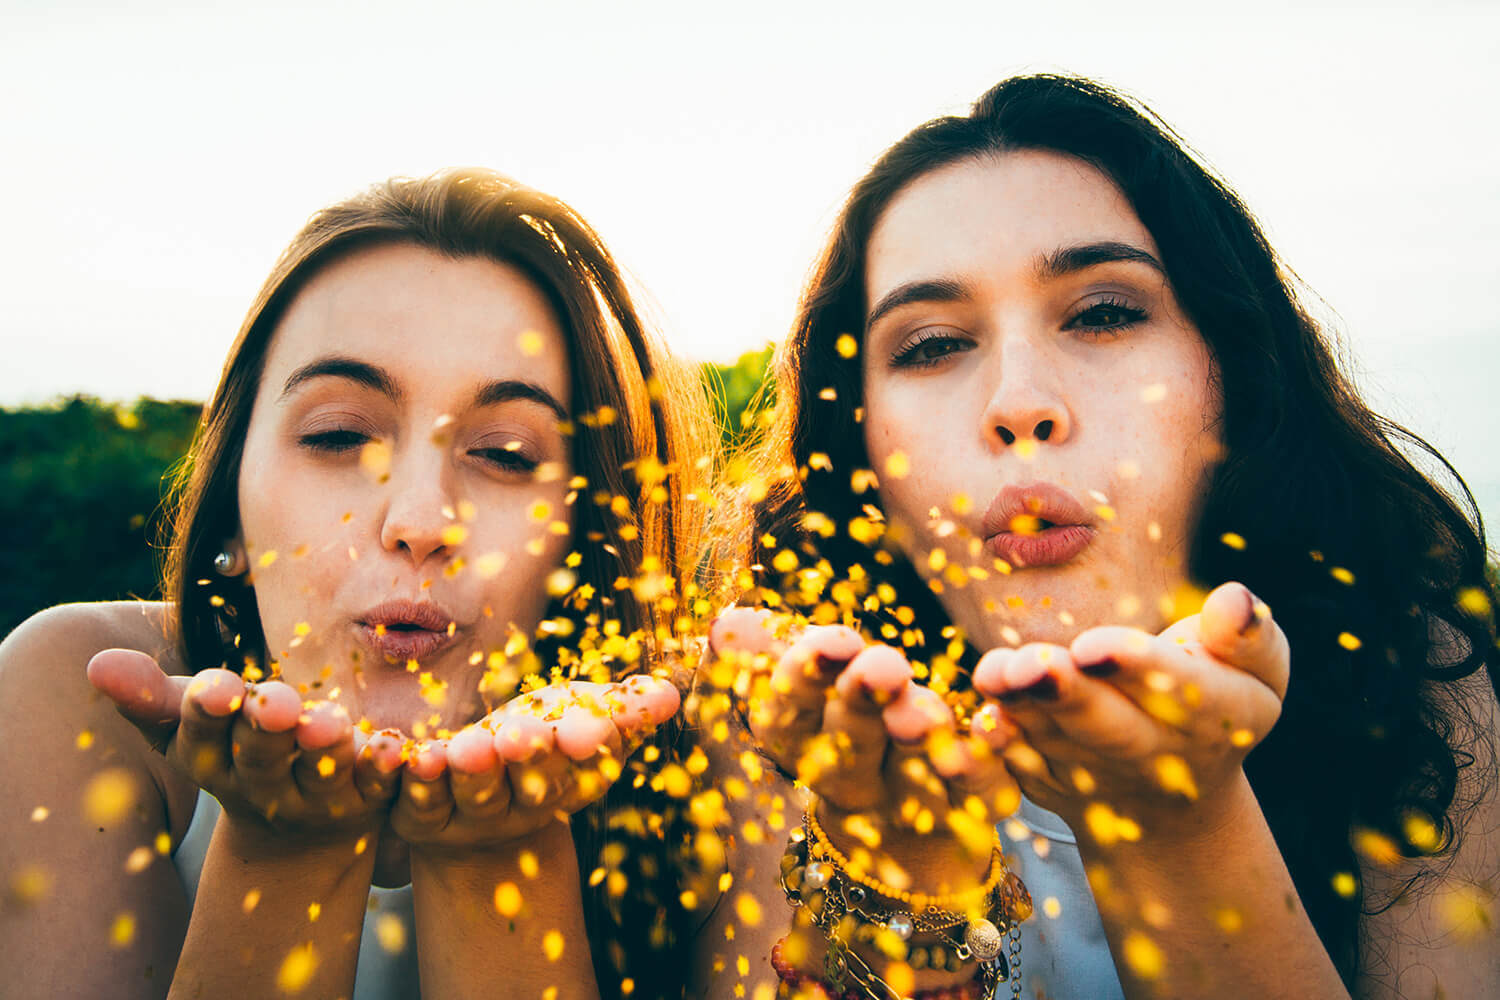 Two students in the countryside blowing glitter from their hands.